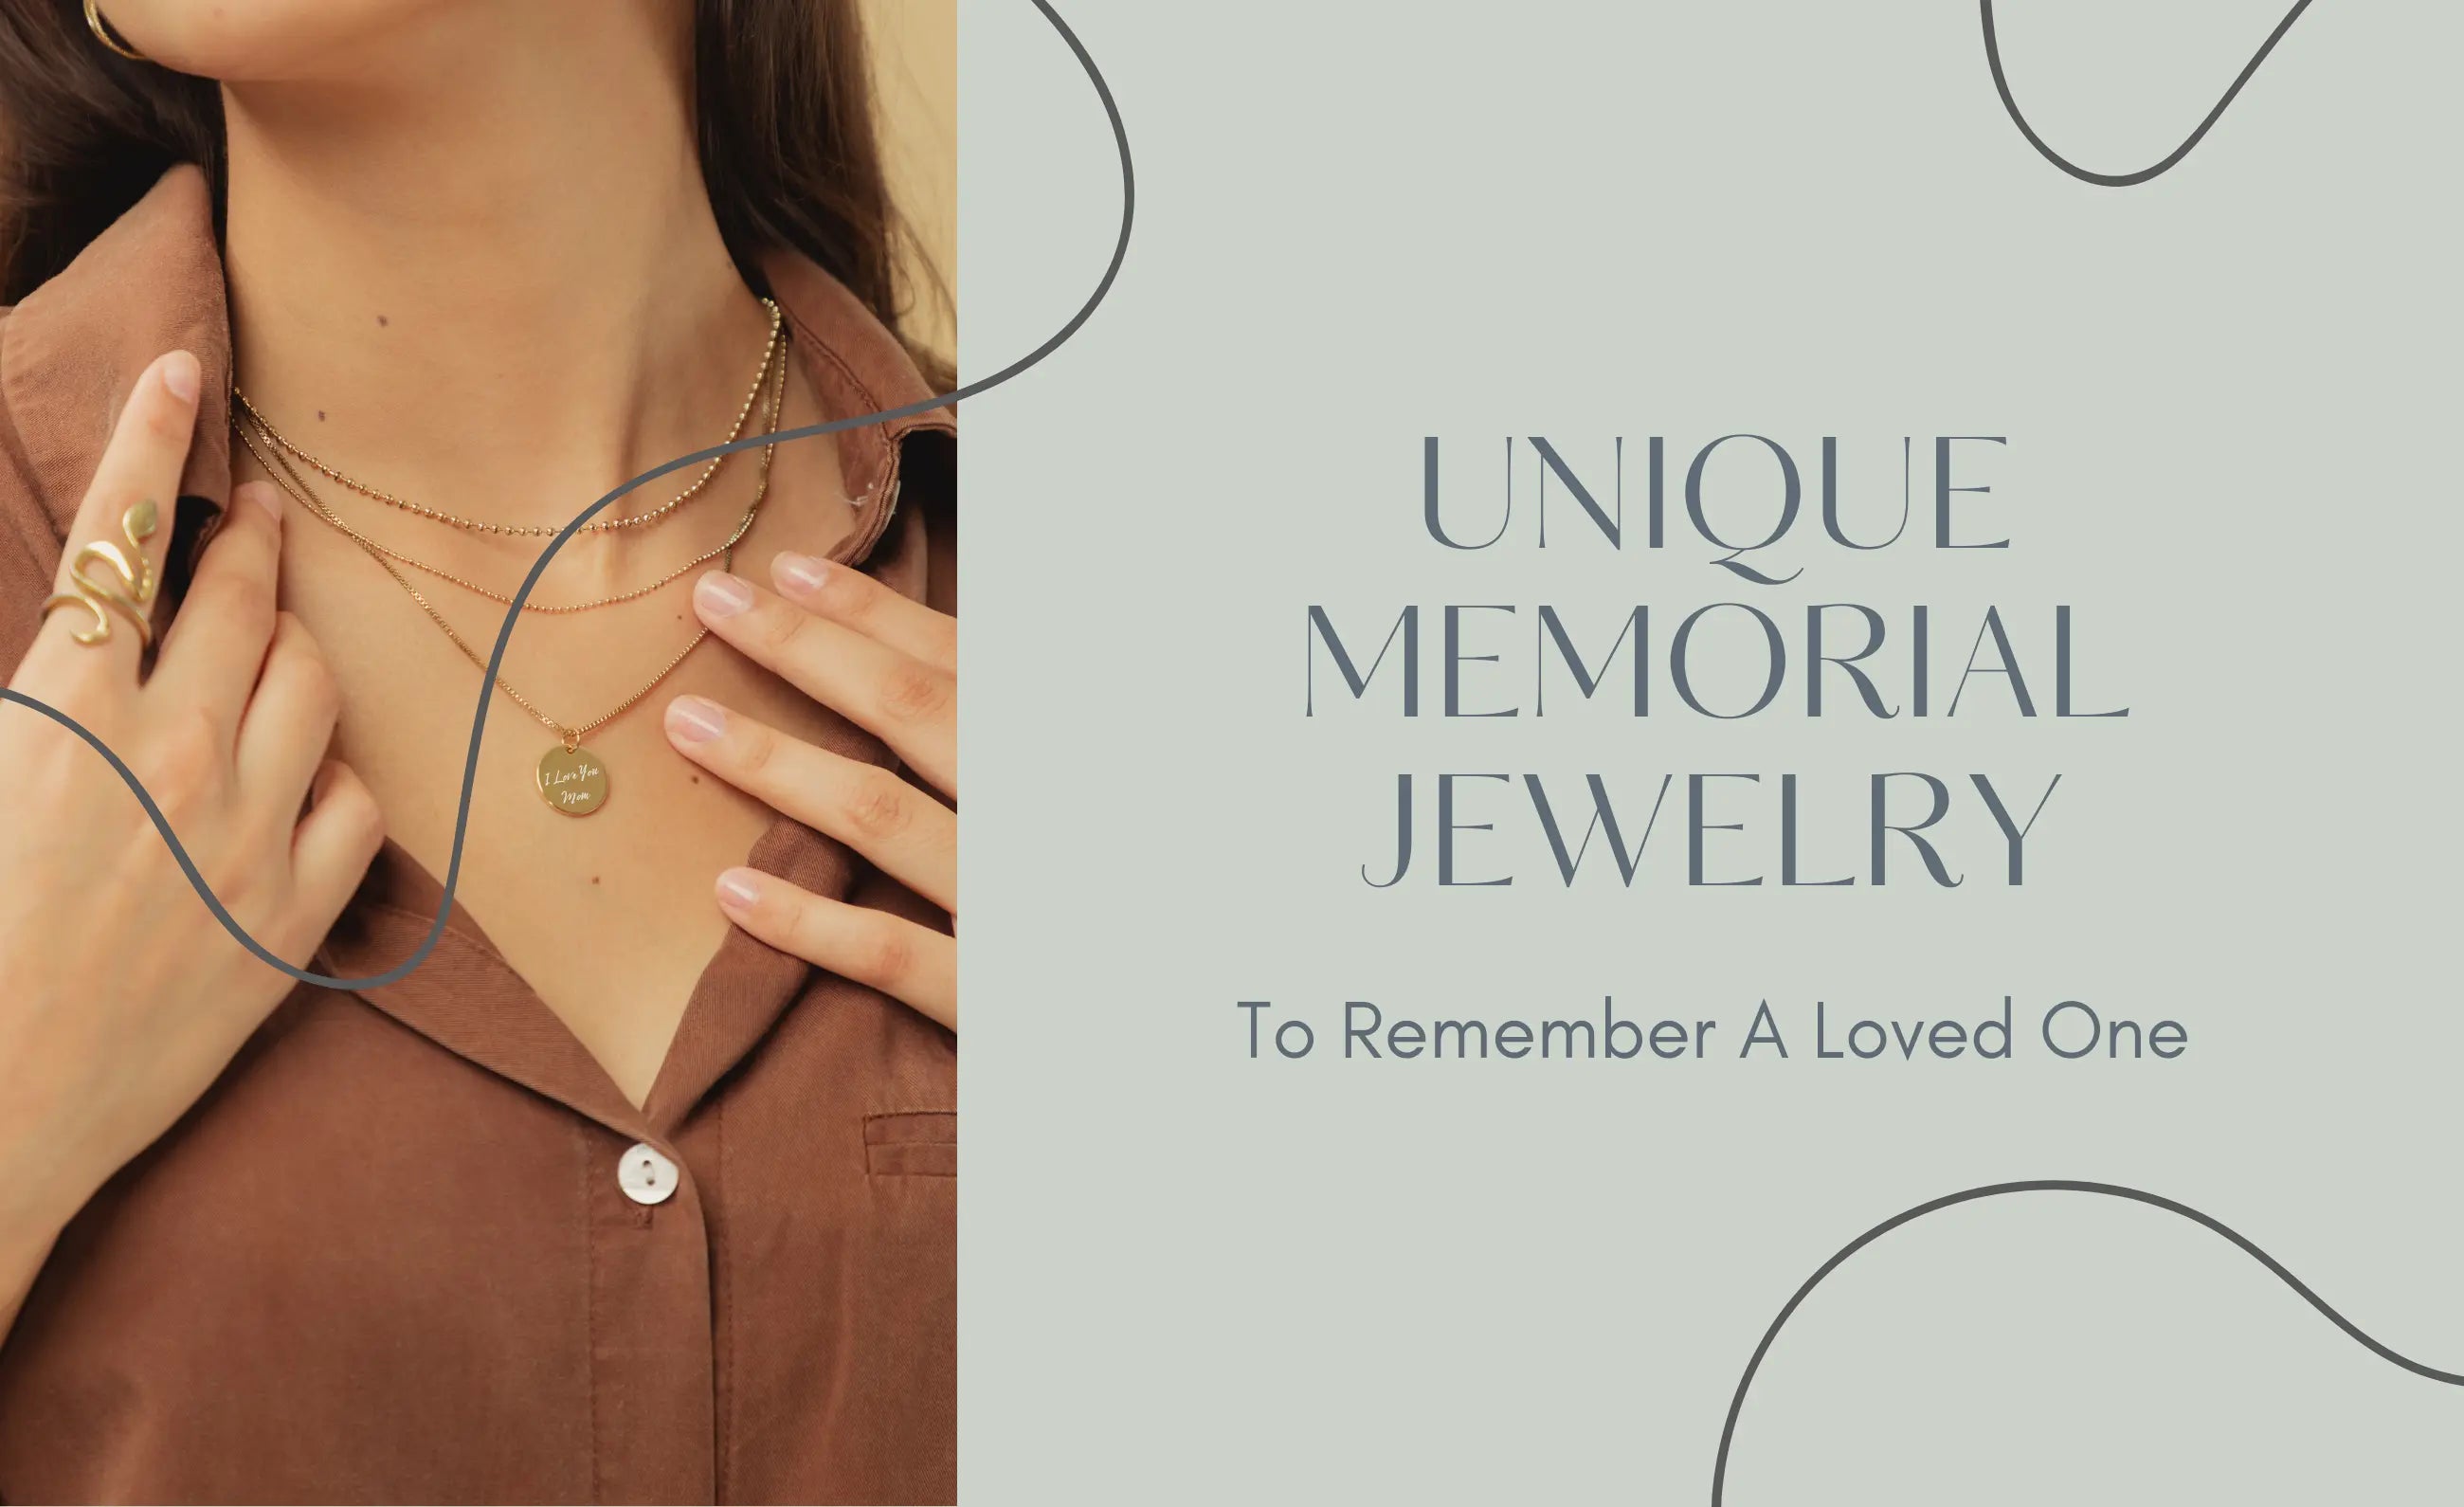 Unique Memorial Jewelry to Remember a Loved One: Urn Necklaces, Handwriting Charms & More